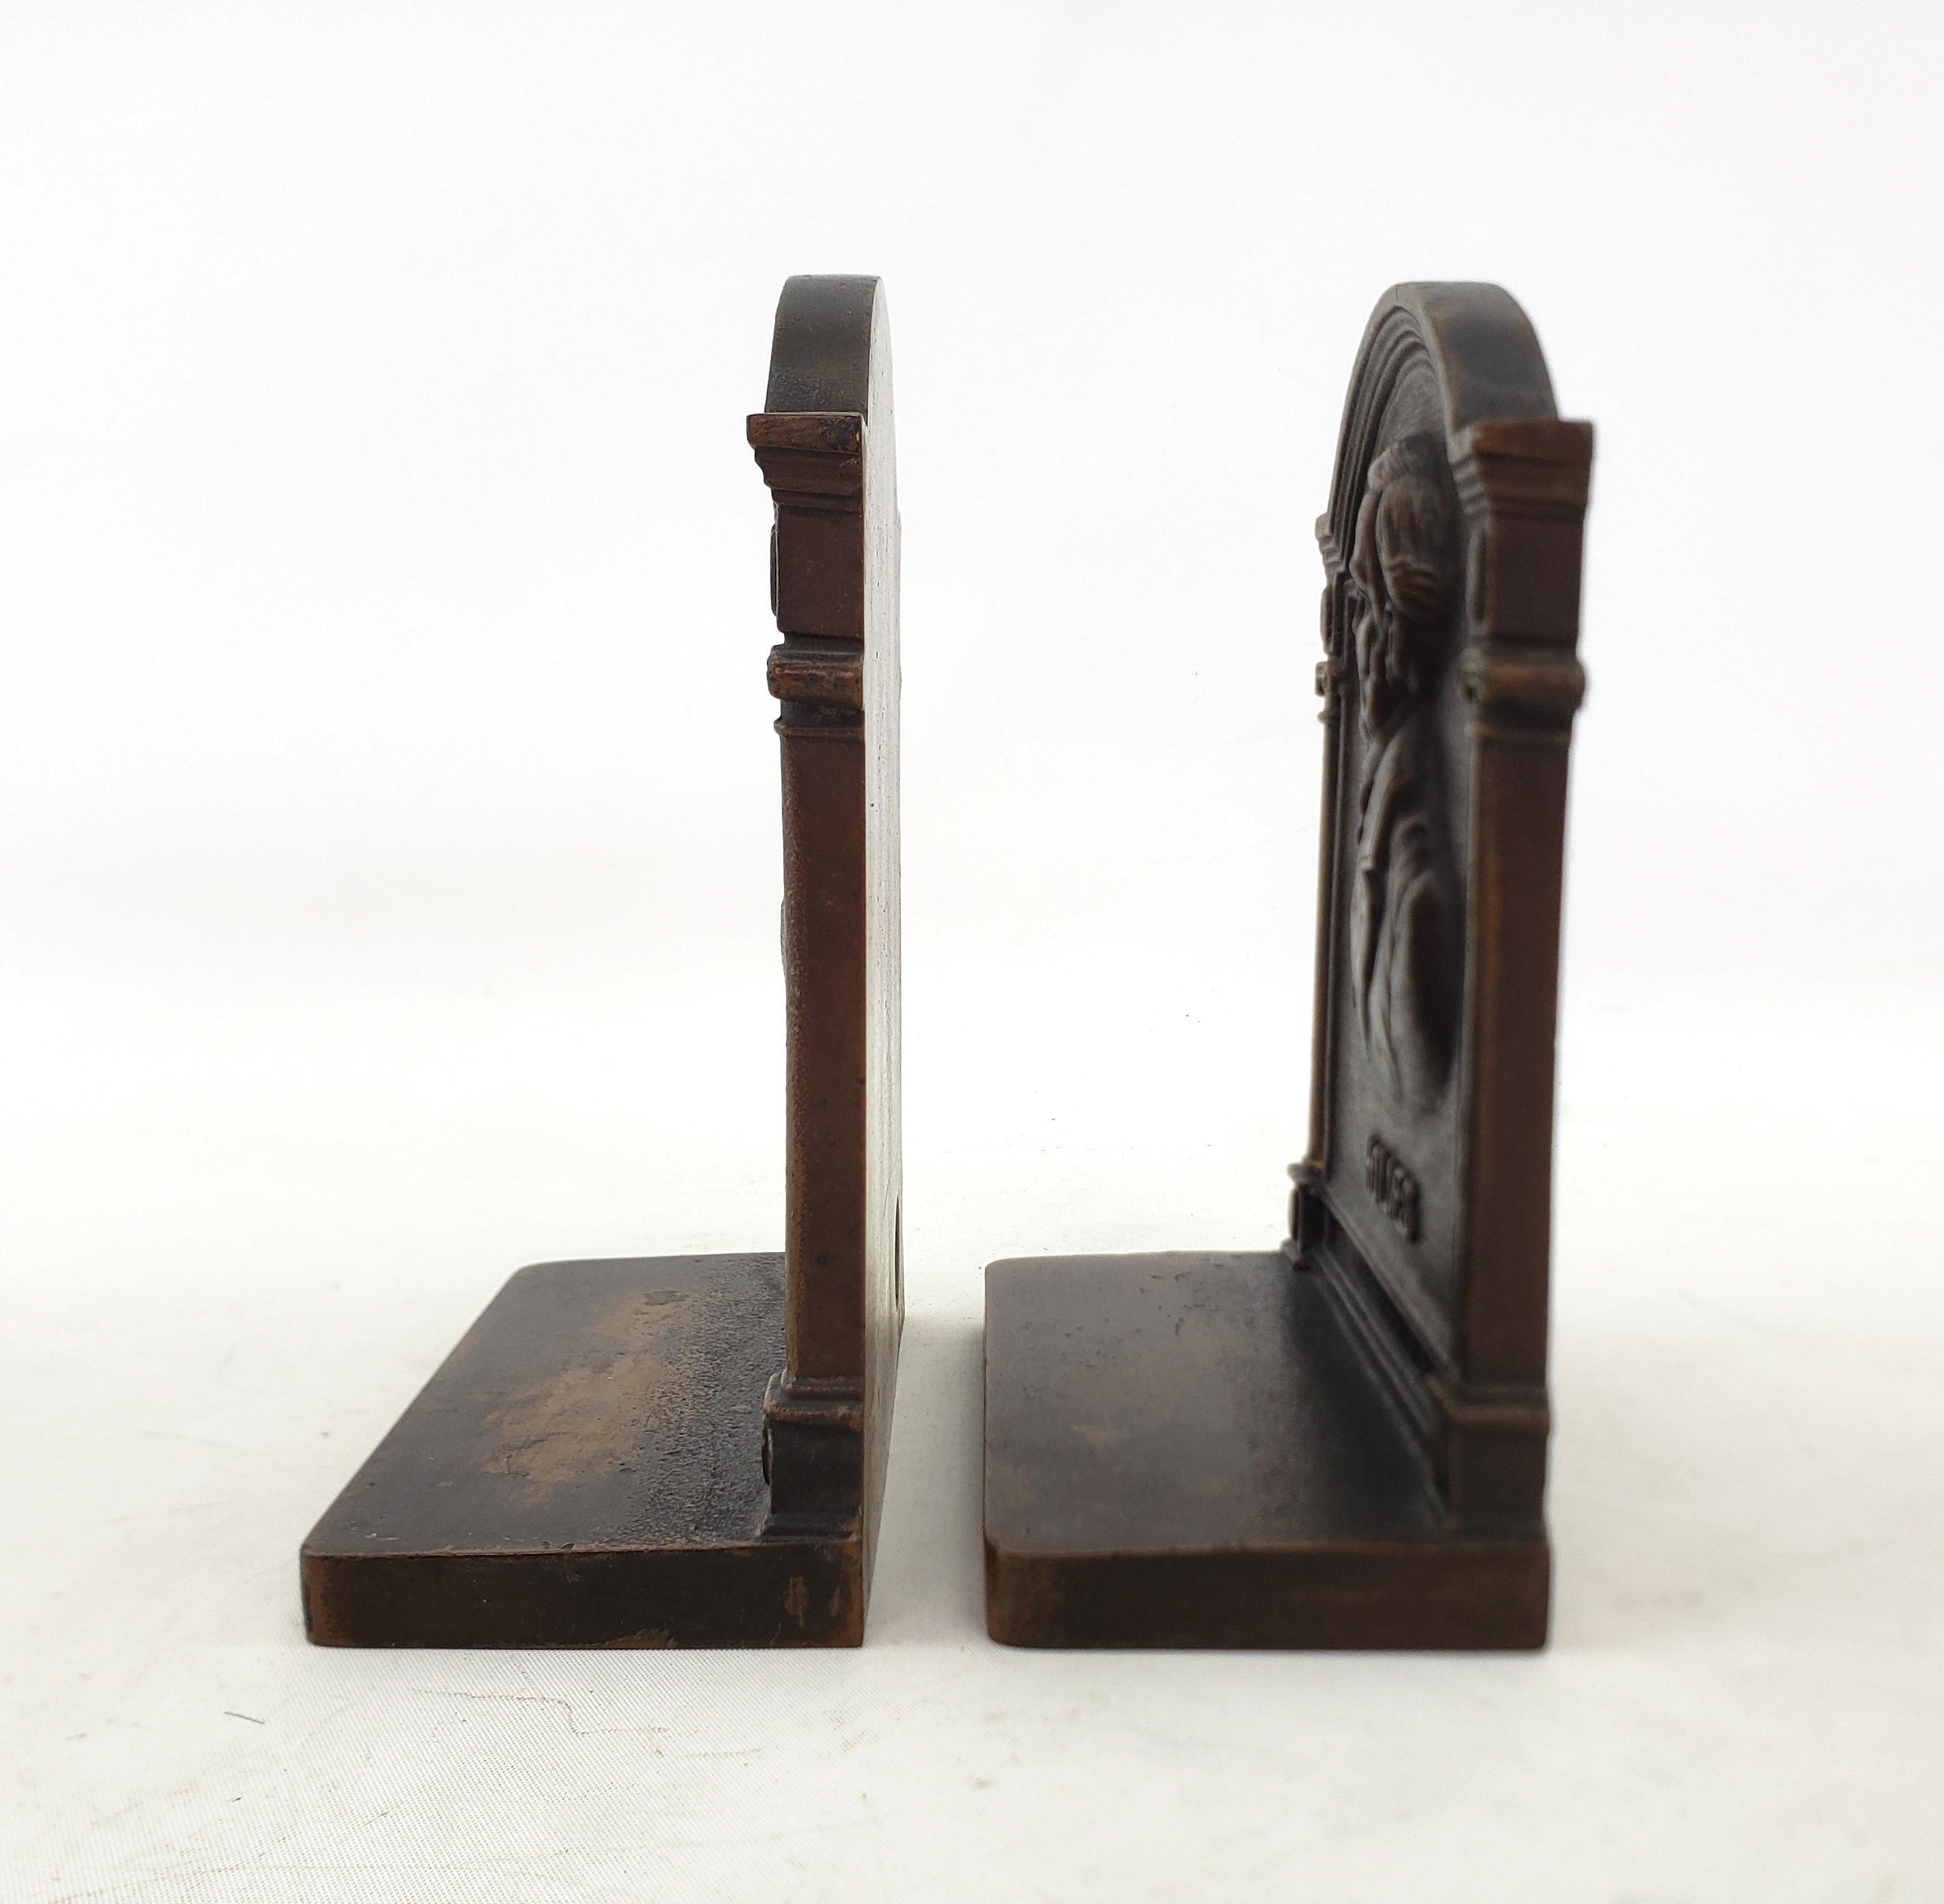 Antique Bradley & Hubbard Cast Iron Bookends of Authors Dickens & Oliver Holmes In Good Condition For Sale In Hamilton, Ontario